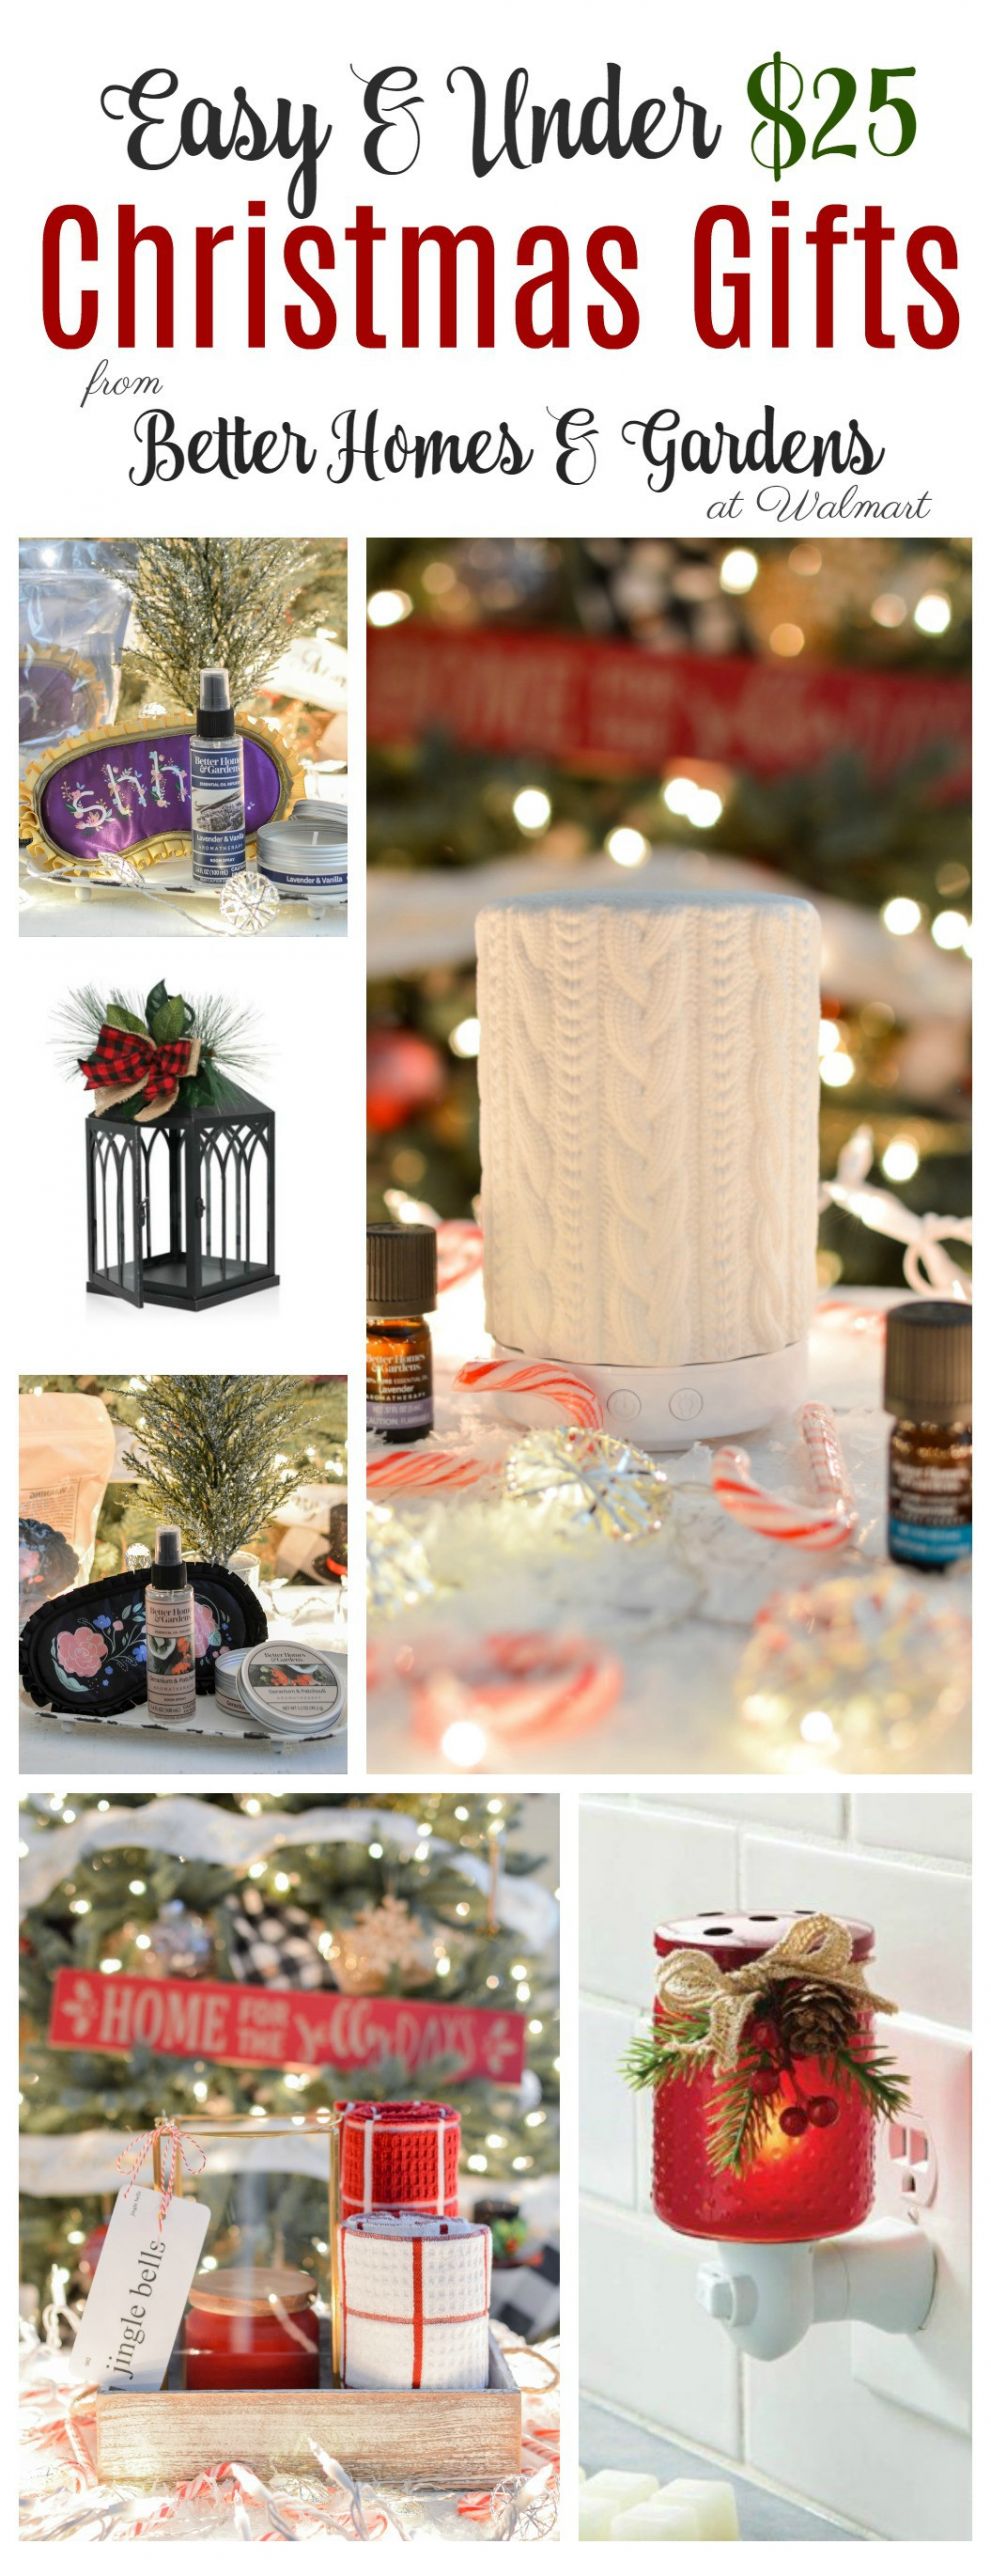 Holiday Gift Ideas Under $25
 Cute Christmas Gift Ideas Under $25 with Better Homes